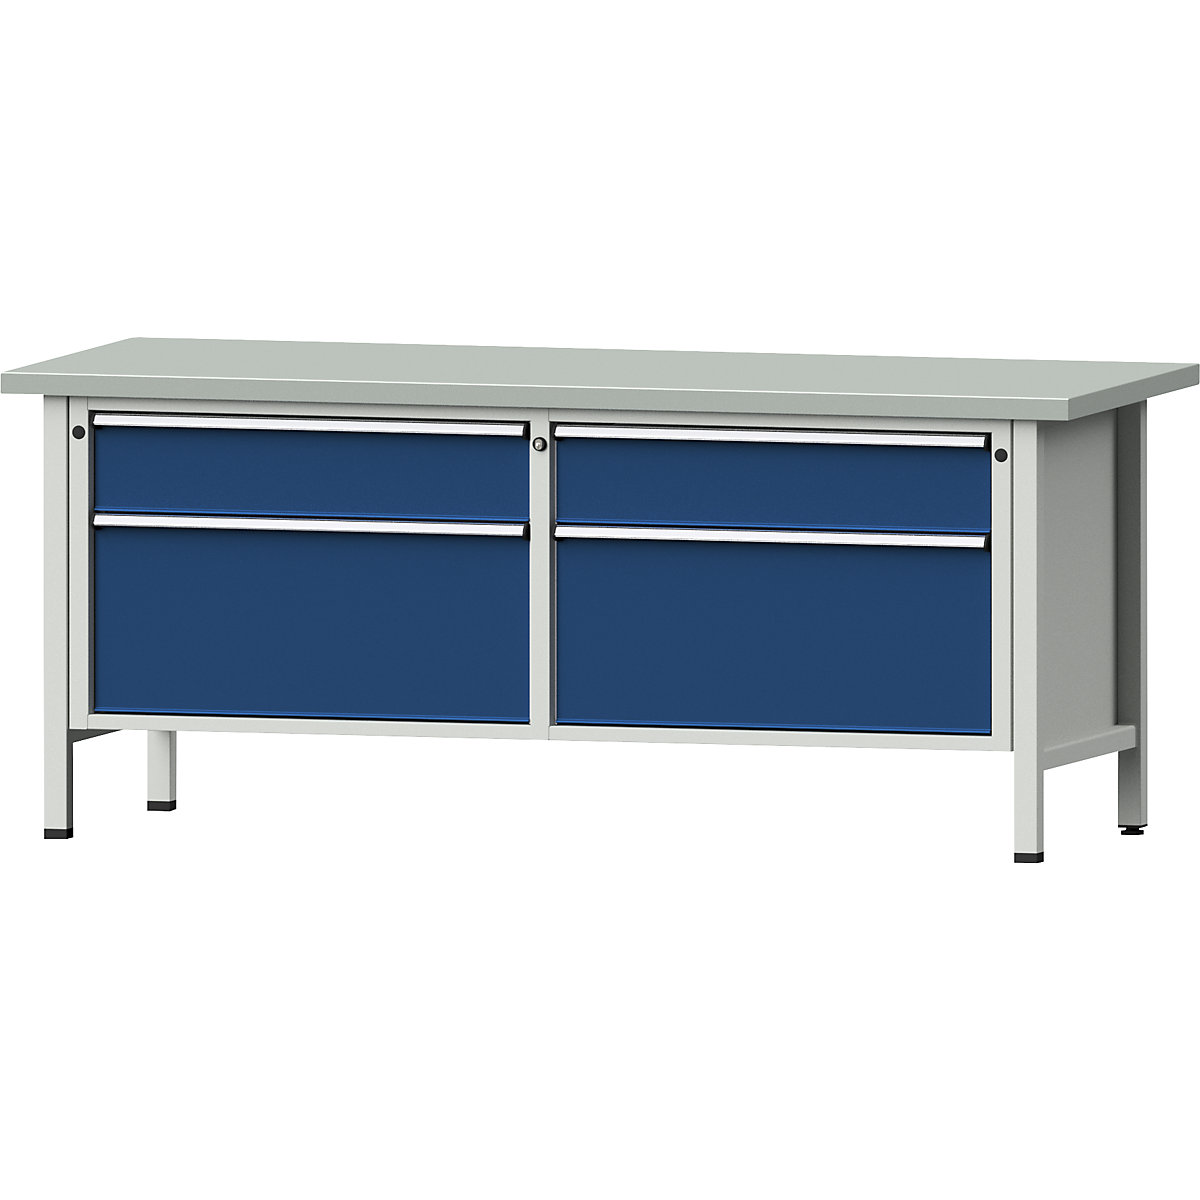 Workbench with XL/XXL drawers, frame construction – ANKE, width 2000 mm, 4 drawers, sheet steel covered worktop, front in gentian blue-8